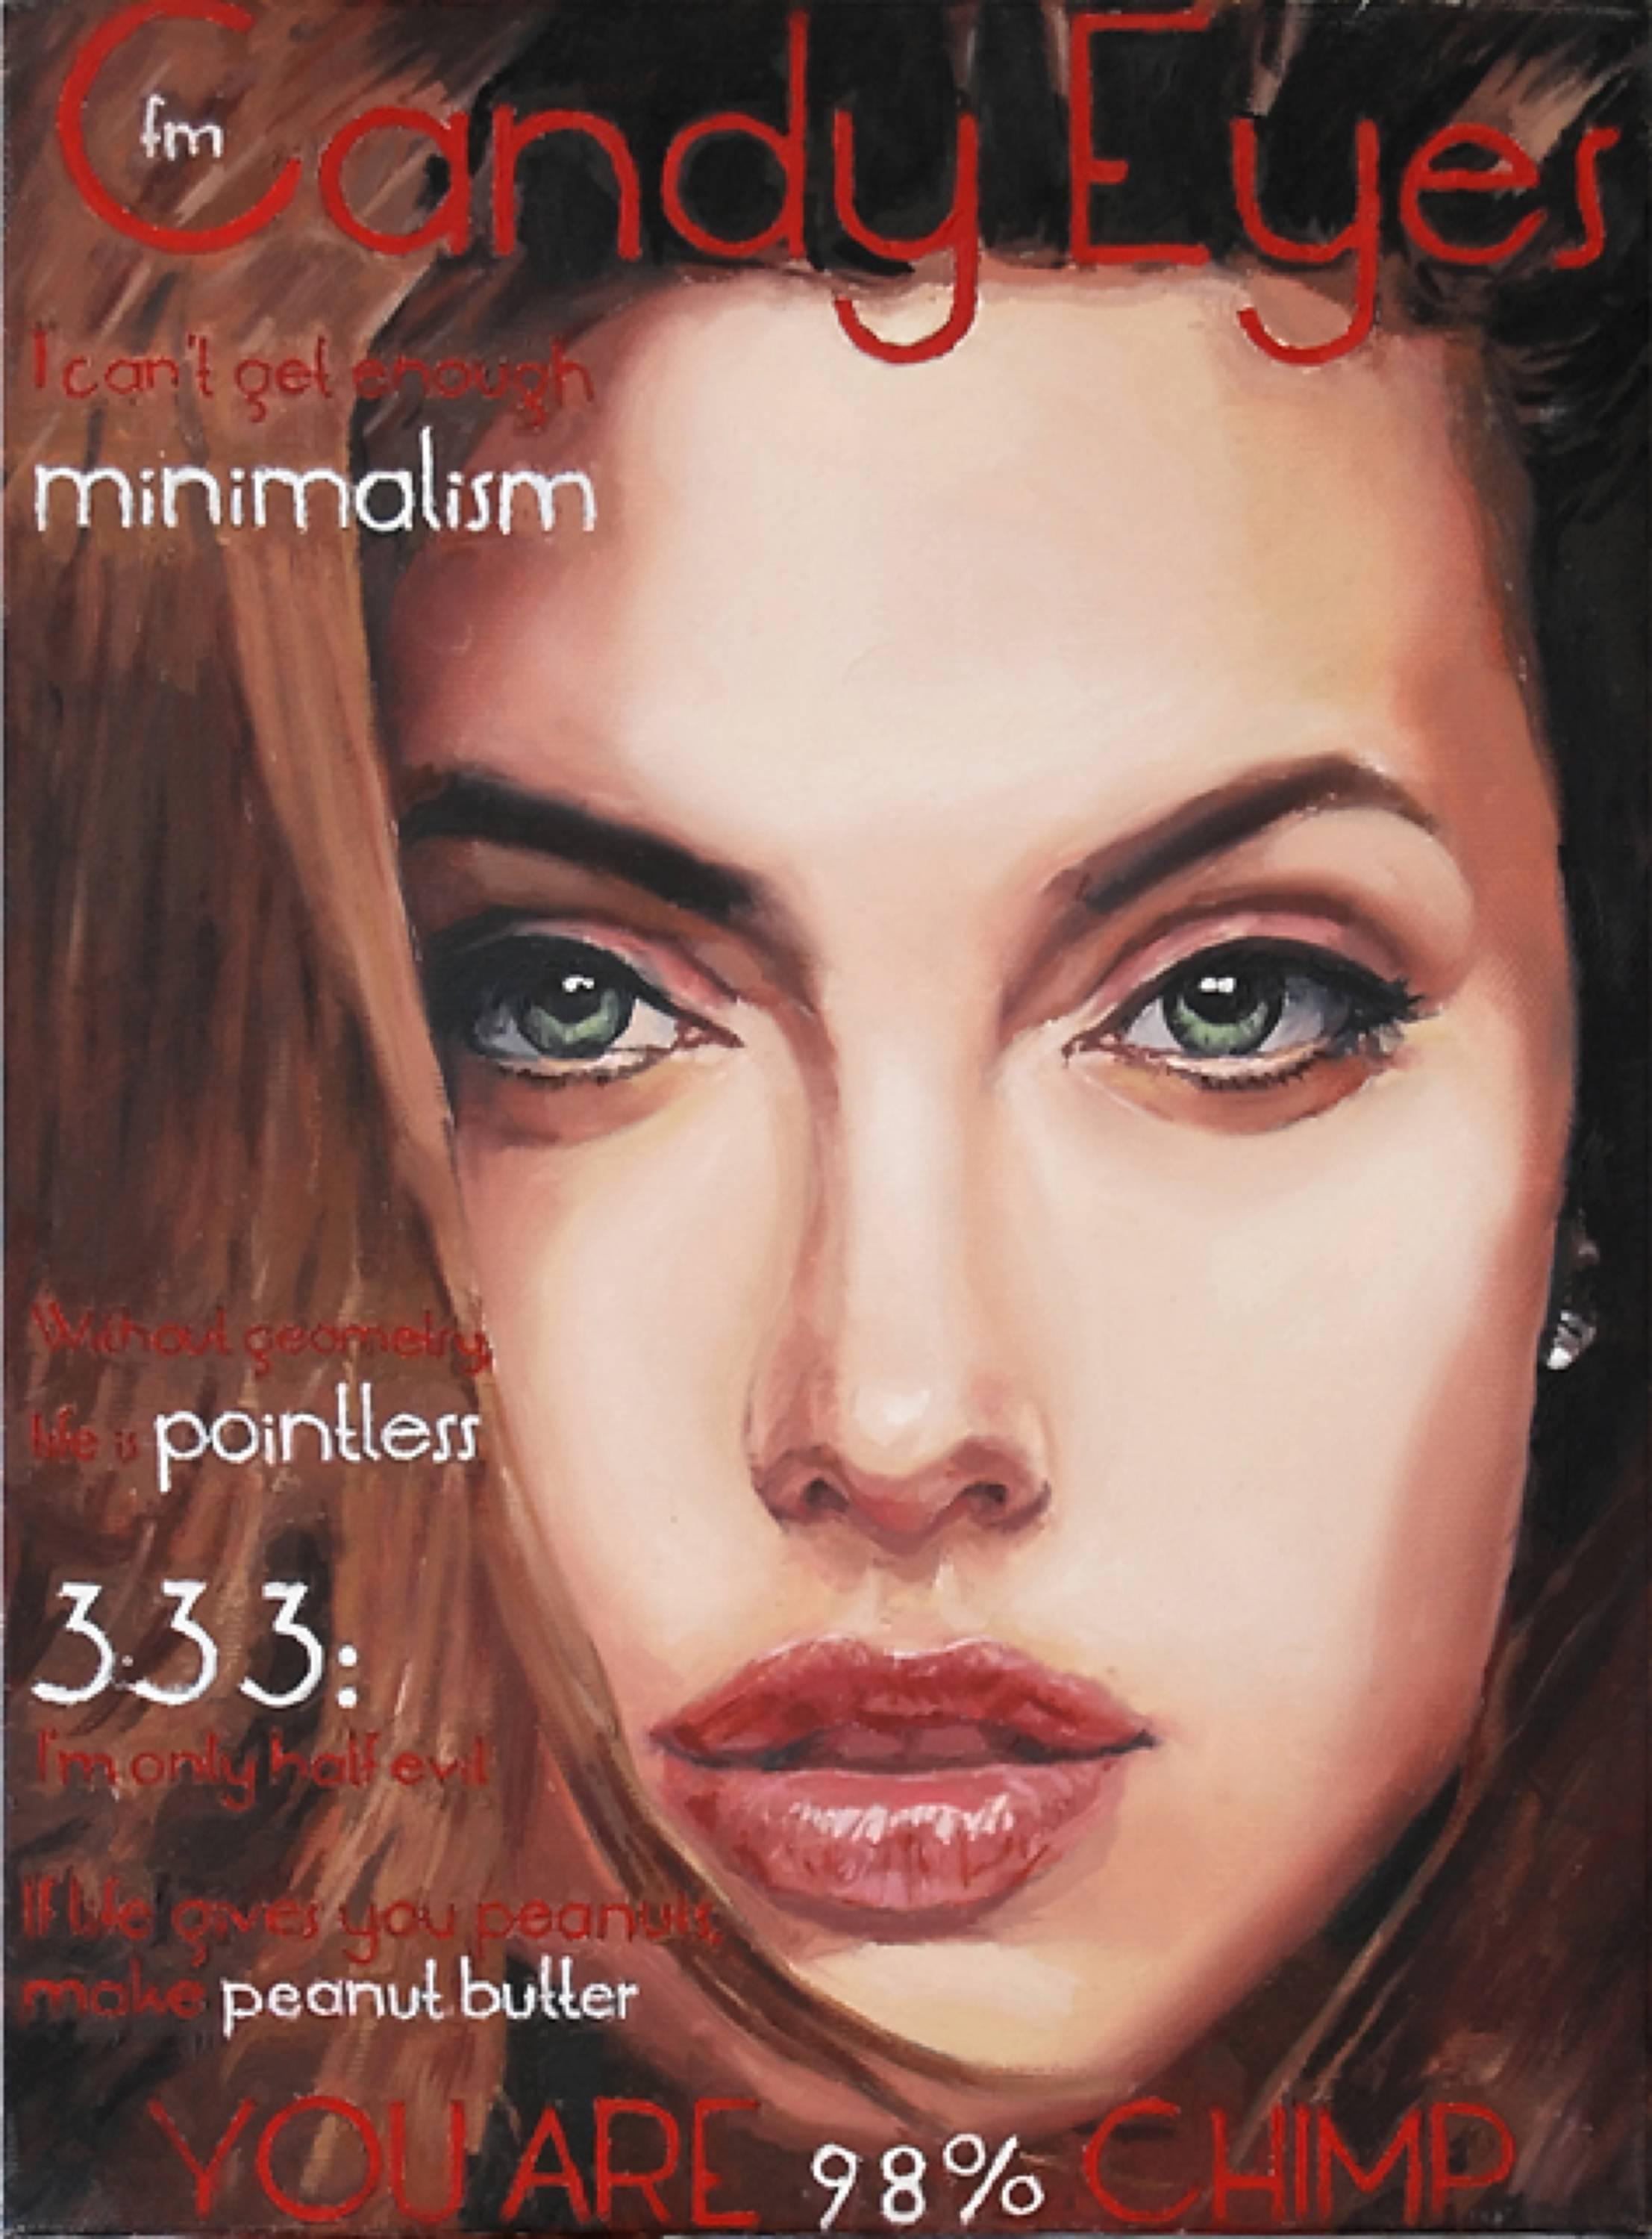 Mihai Florea Portrait Painting - Candy Eyes issue #2 - 21st Century, Portrait, Red, Green Eyes, Figurative, Woman